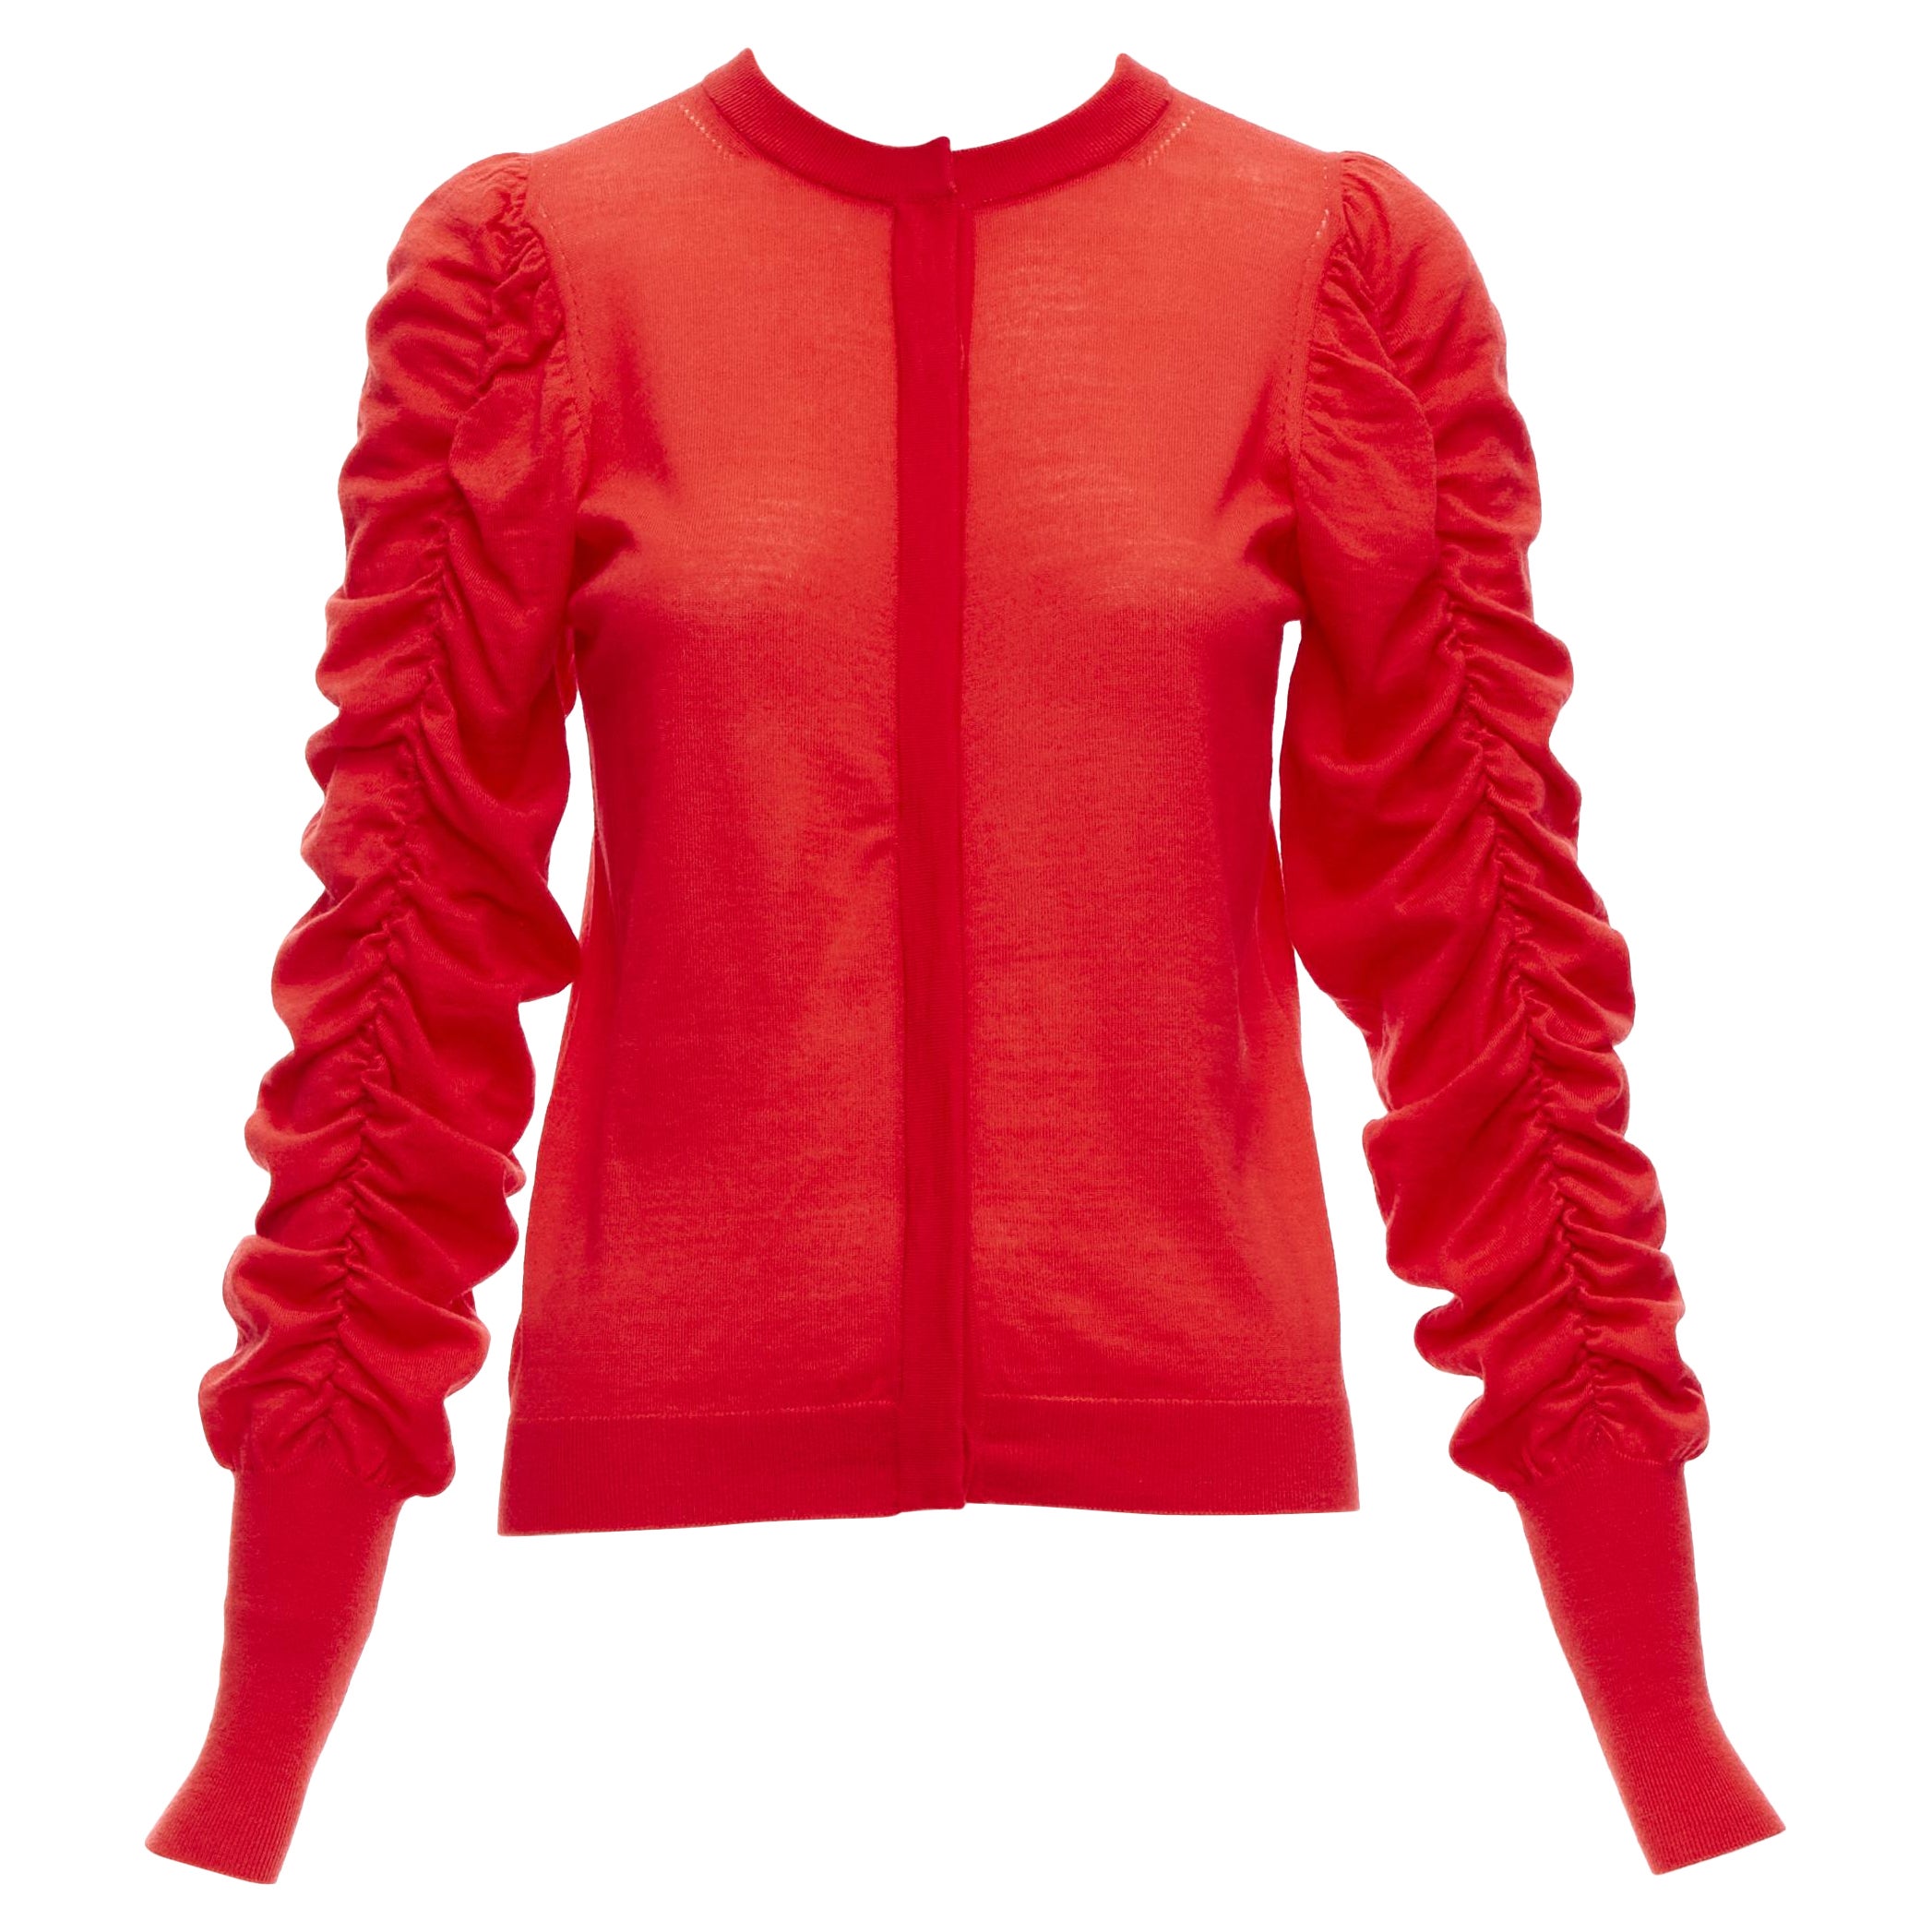 DICE KAYEK red 100% wool ruched sleeves crew neck cardigan sweater FR36 S For Sale